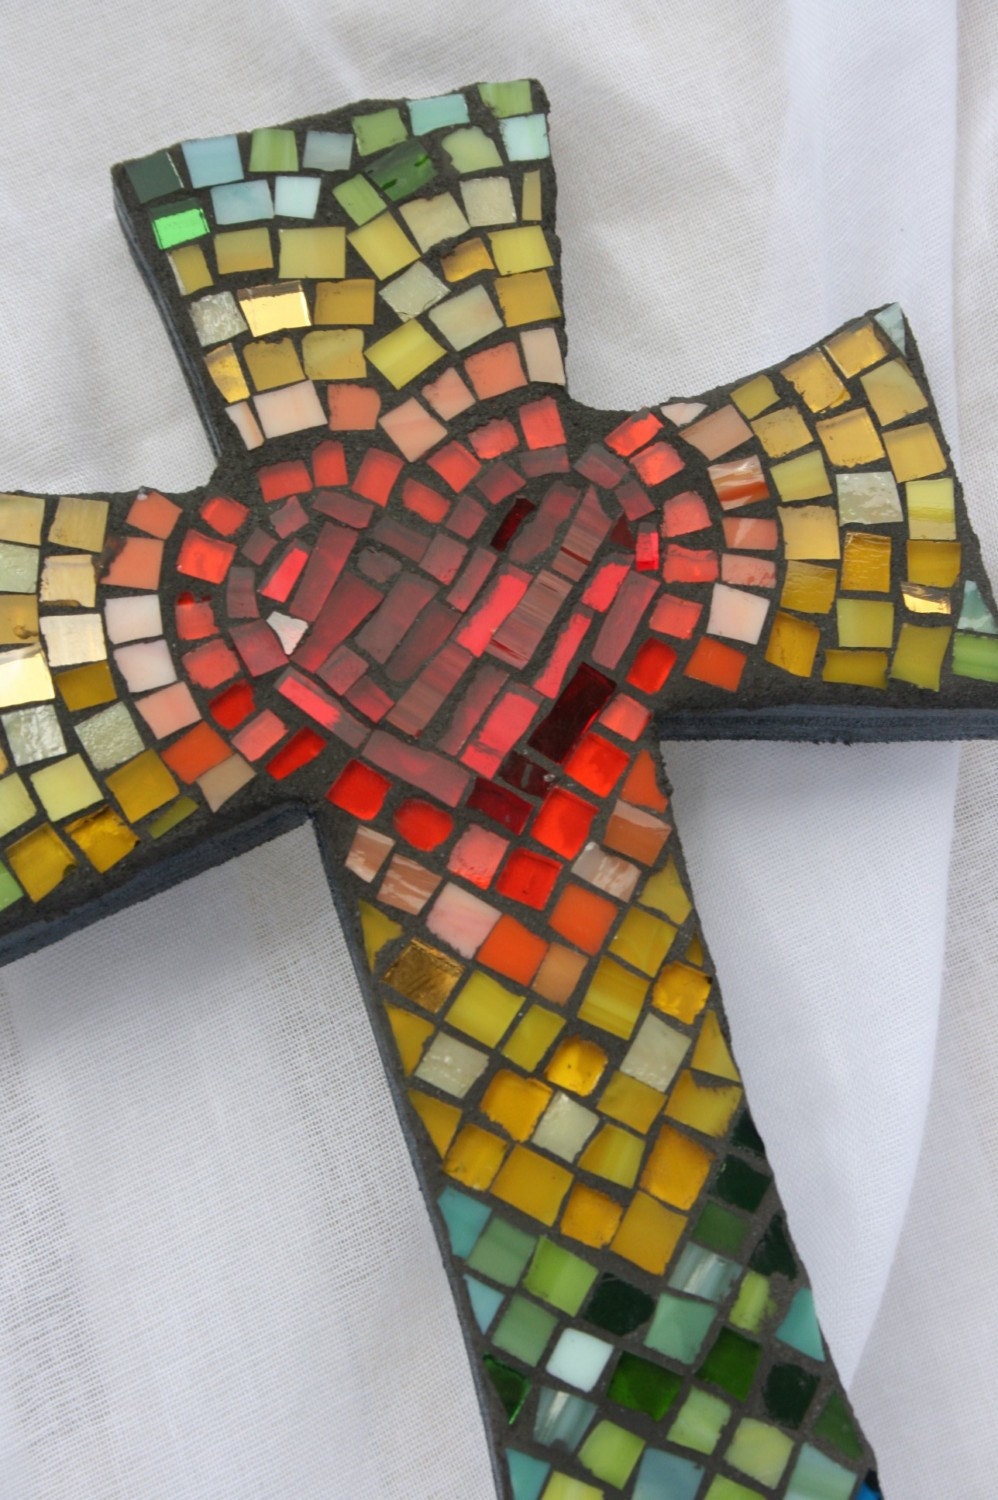 Mosaic Cross with Heart in Center - multicolored